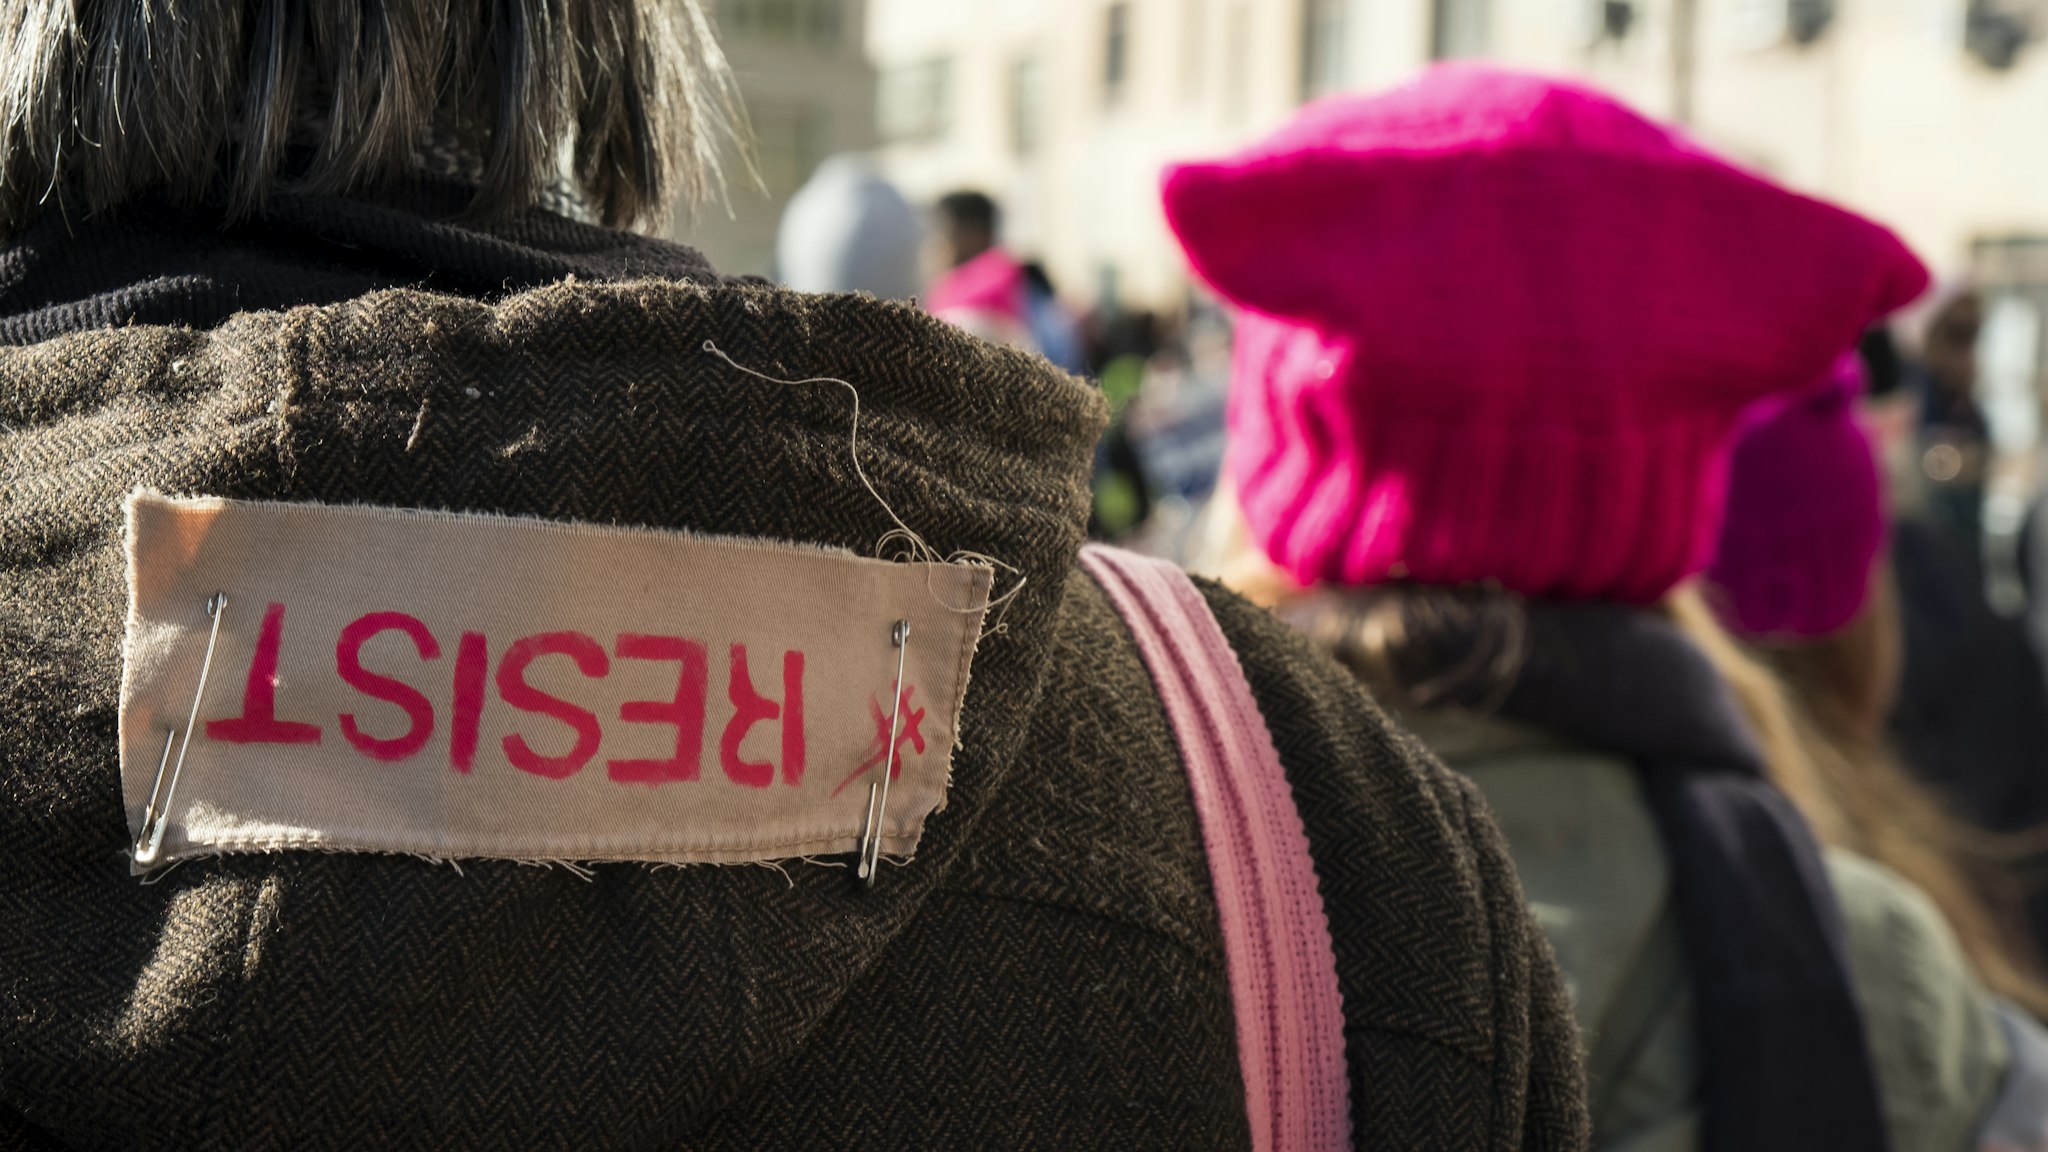 NEW YORK, NY - JANUARY 20: A demonstrator has a safety pin patch saying "RESIST" during the second annual Women's March in the borough of Manhattan in New York City, U.S. on Saturday, January 20, 2018. One year after the inauguration of President Donald Trump, thousands of people will again gather to protest for equal rights at the 2018 Women's March. (Photo by Ira L. Black/Corbis via Getty Images)